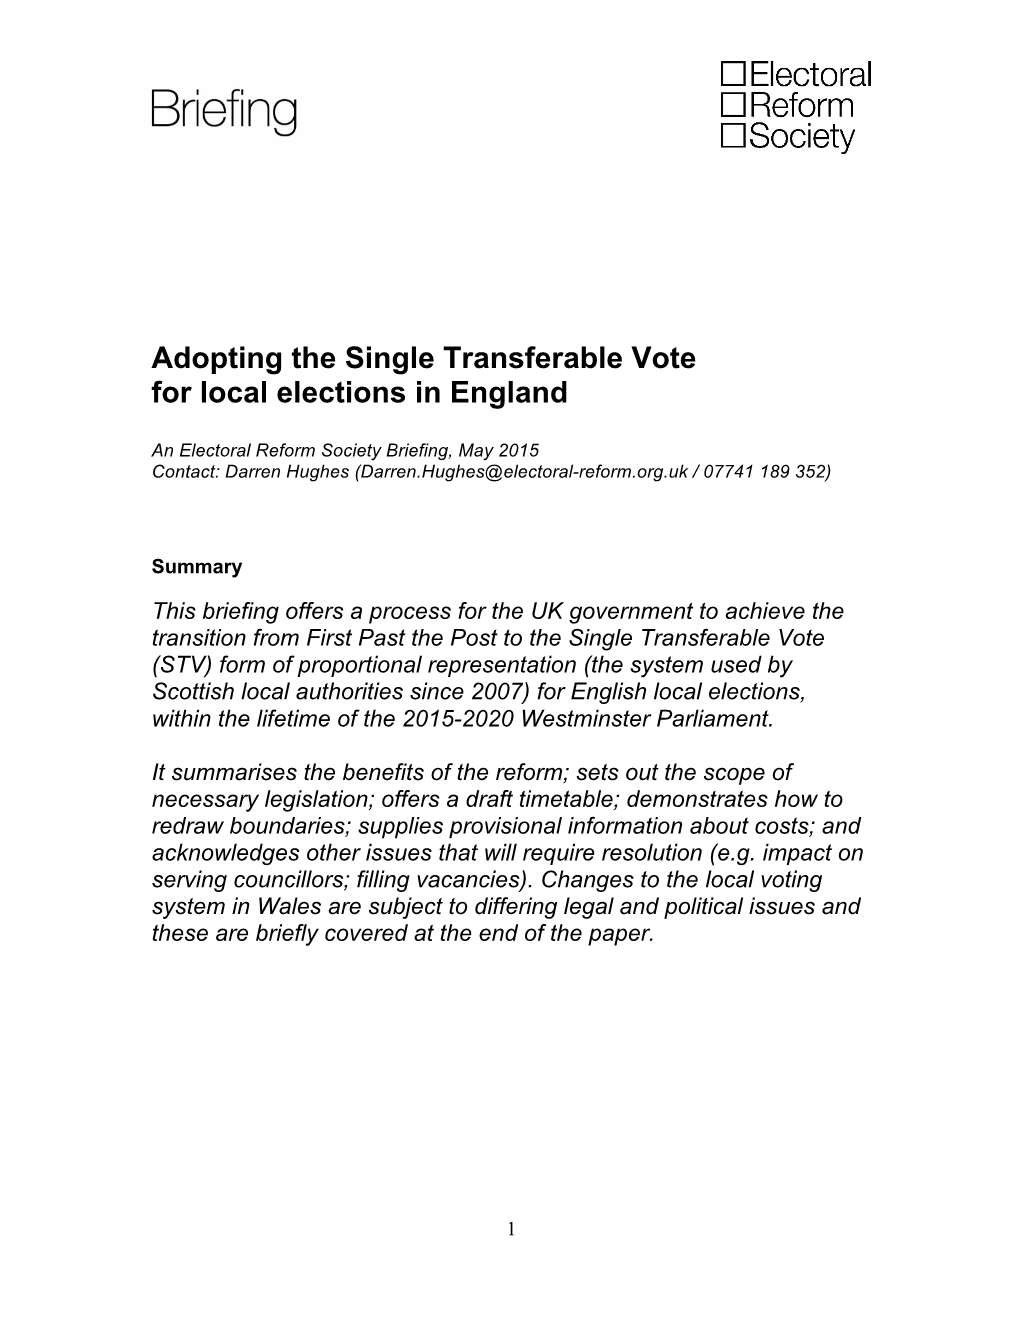 Adopting the Single Transferable Vote for Local Elections in England